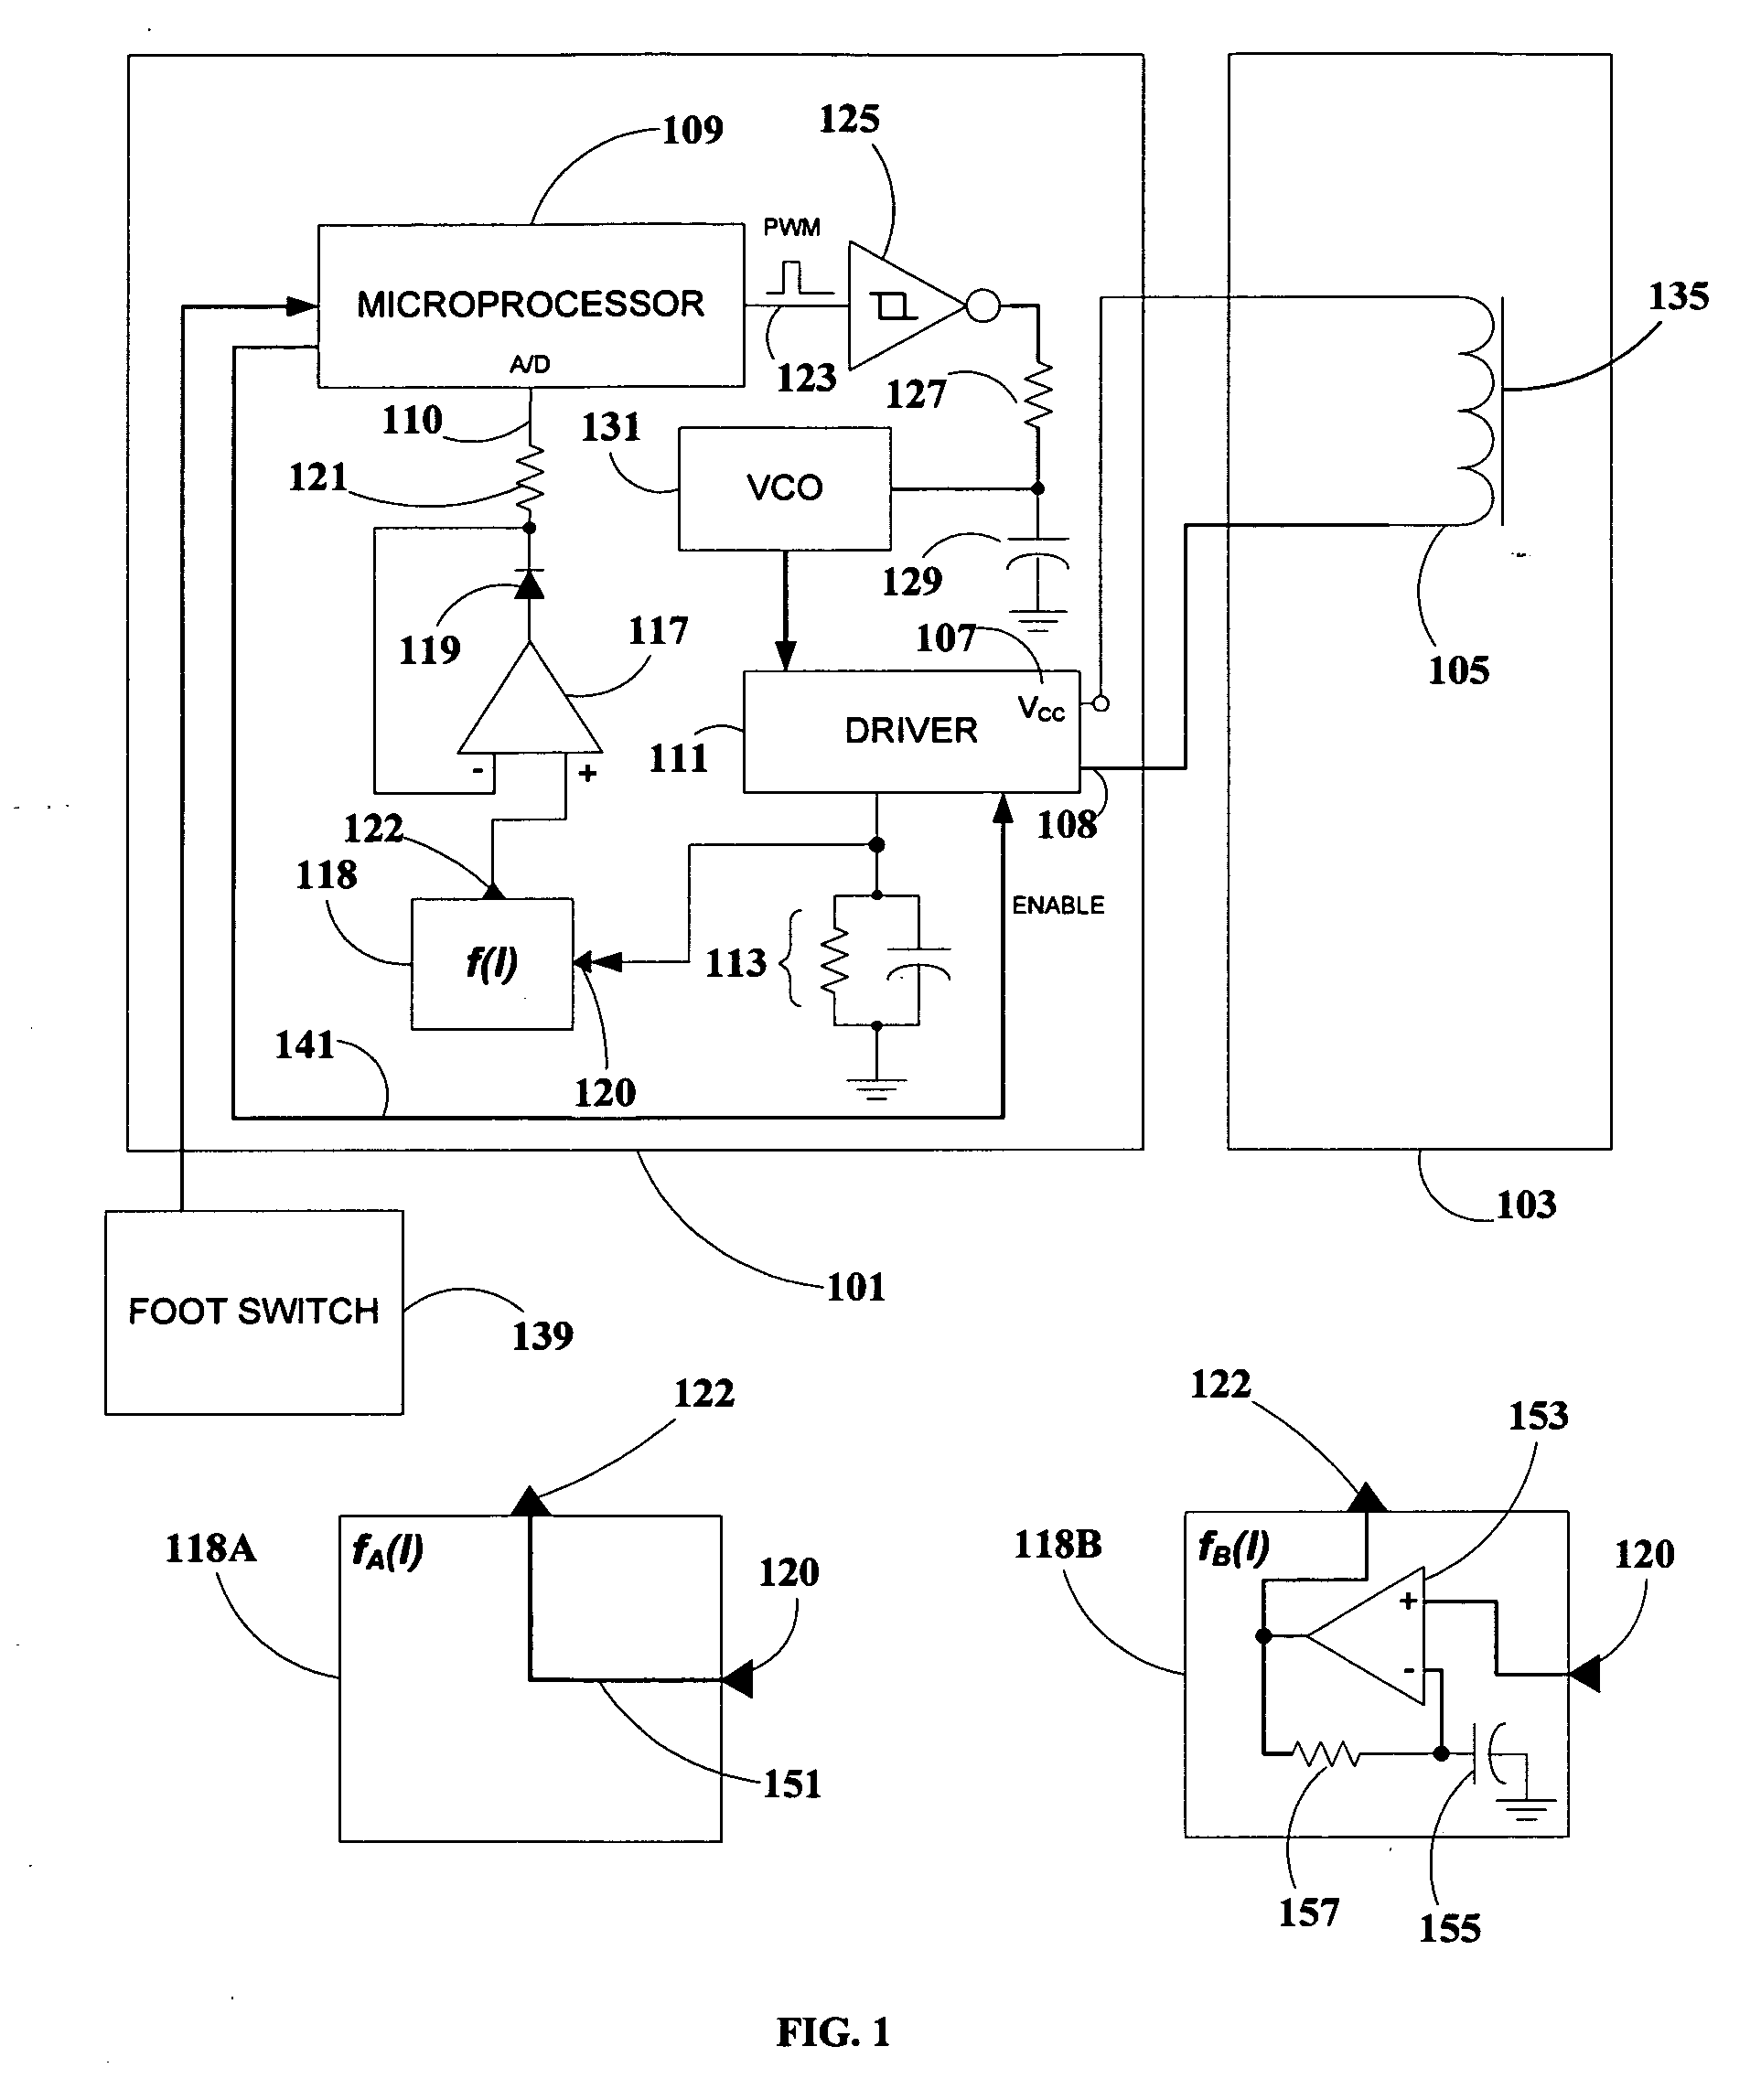 Apparatus and method for controlling excitation frequency of magnetostrictive transducer